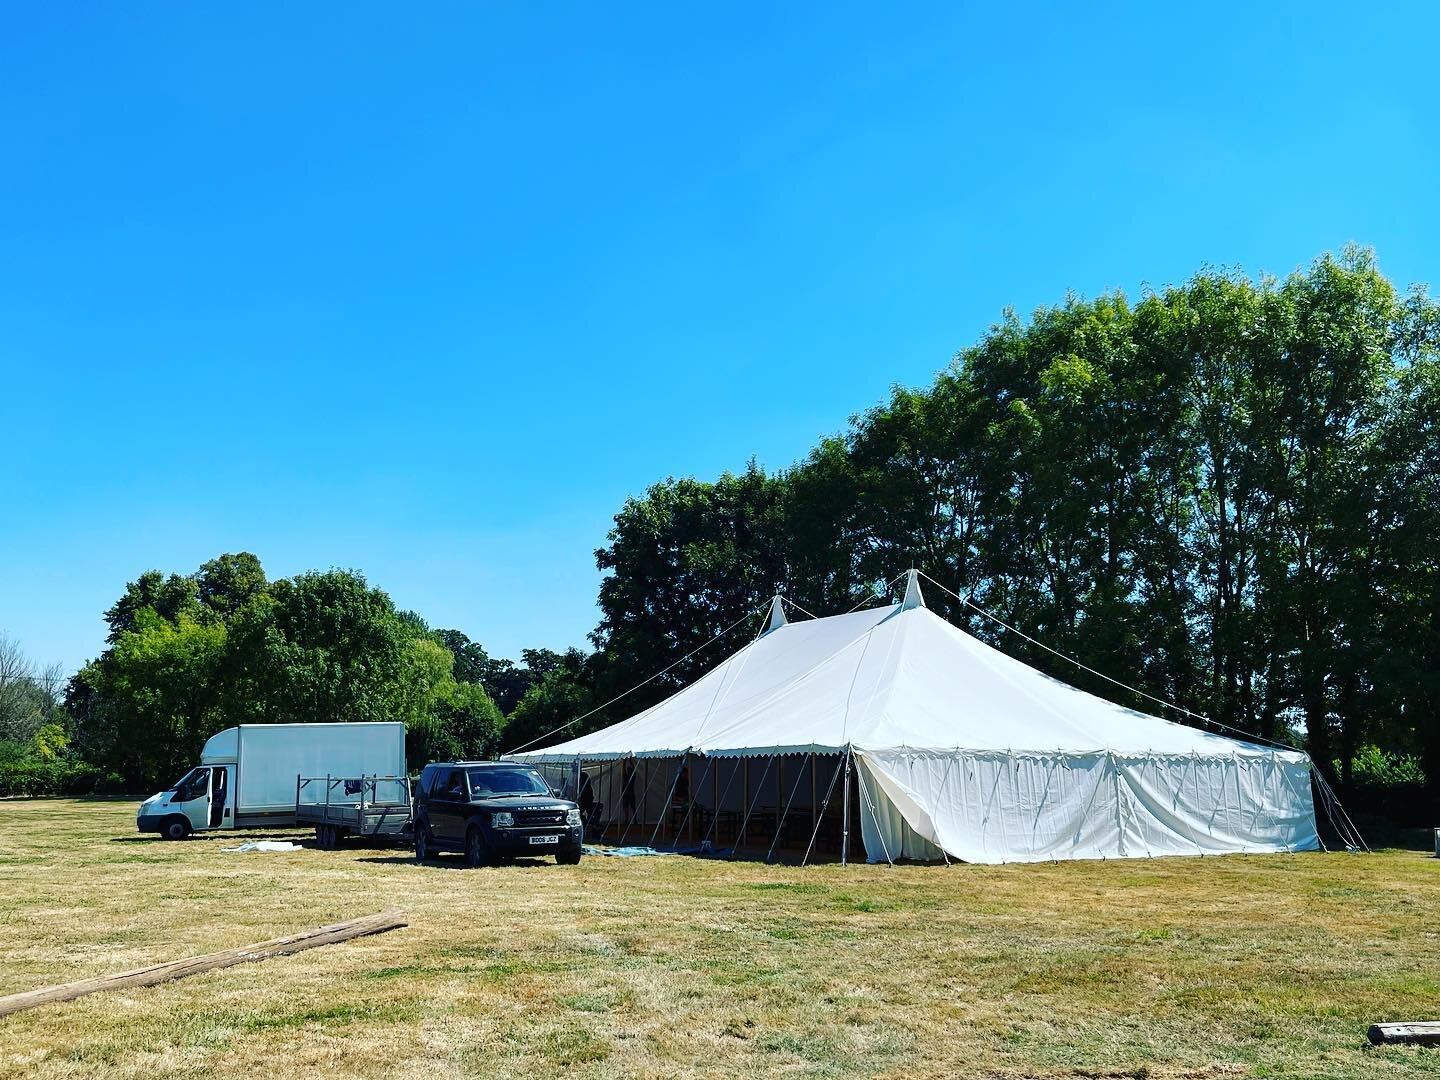 This weekends wedding here at pamphill is shaping up nicely with the weather set to be a scorcher! 

Of course we will be on hand serving some of our finest ice cream from the bike 👌🍦

#pamphilldairy #pamphilldairyicecream #wedding #marquee #sunshi